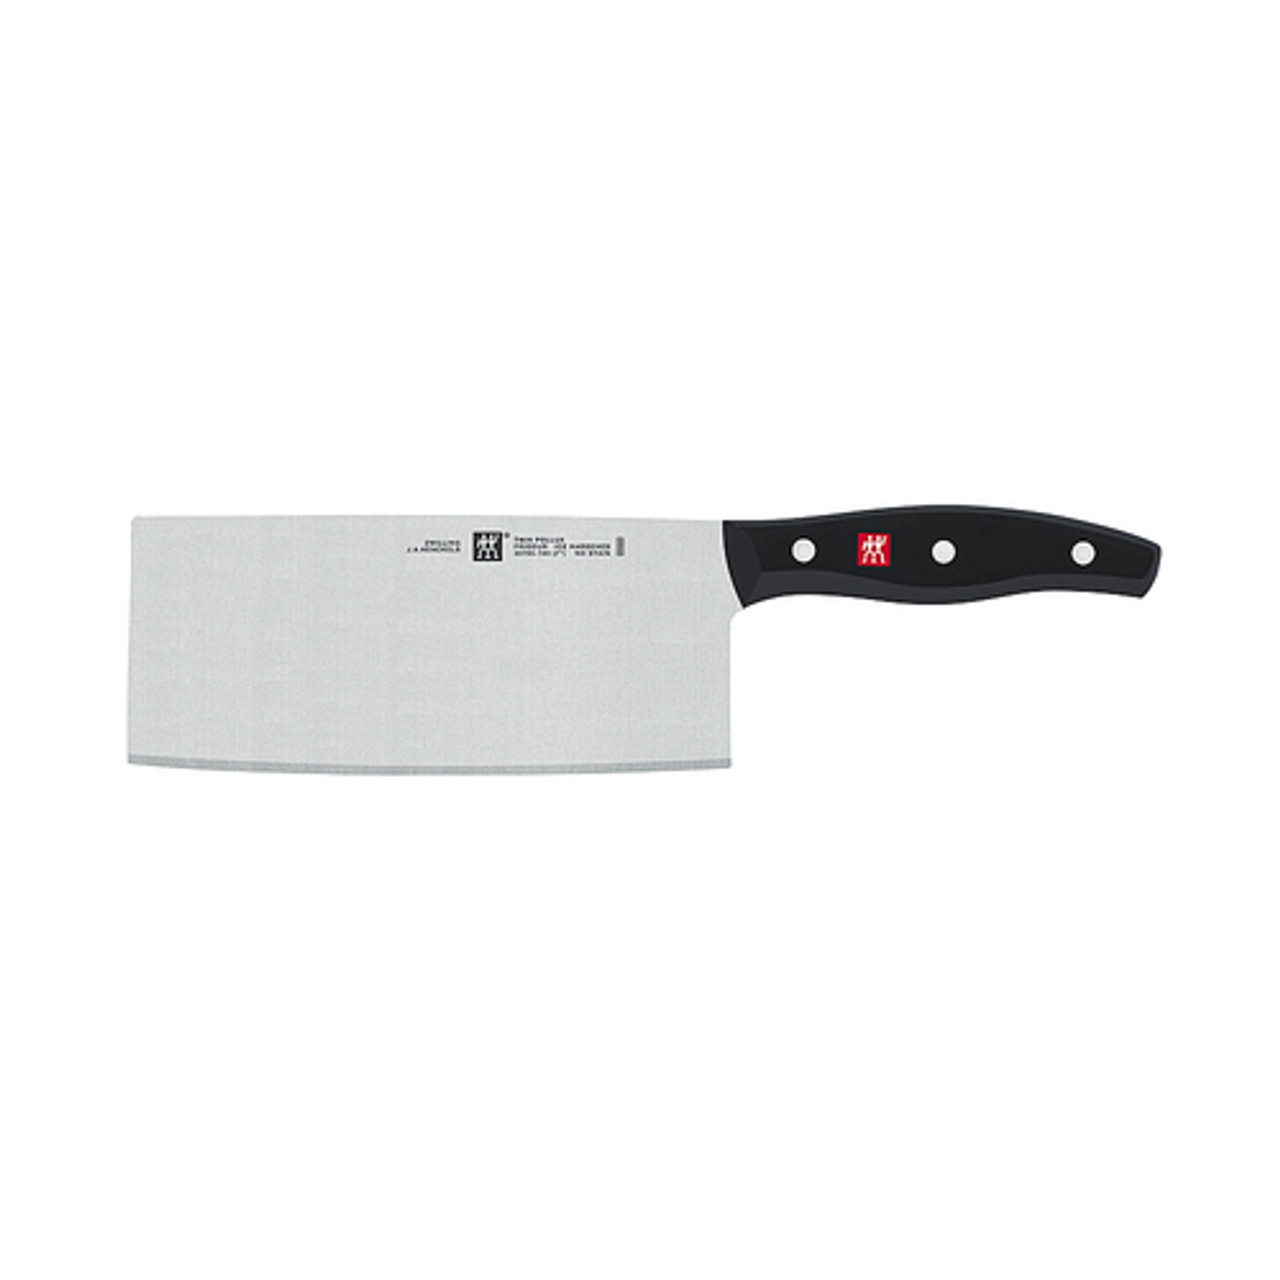 ZWILLING TWIN Signature 7-inch Chinese Chef's Knife/Vegetable Cleaver - Black